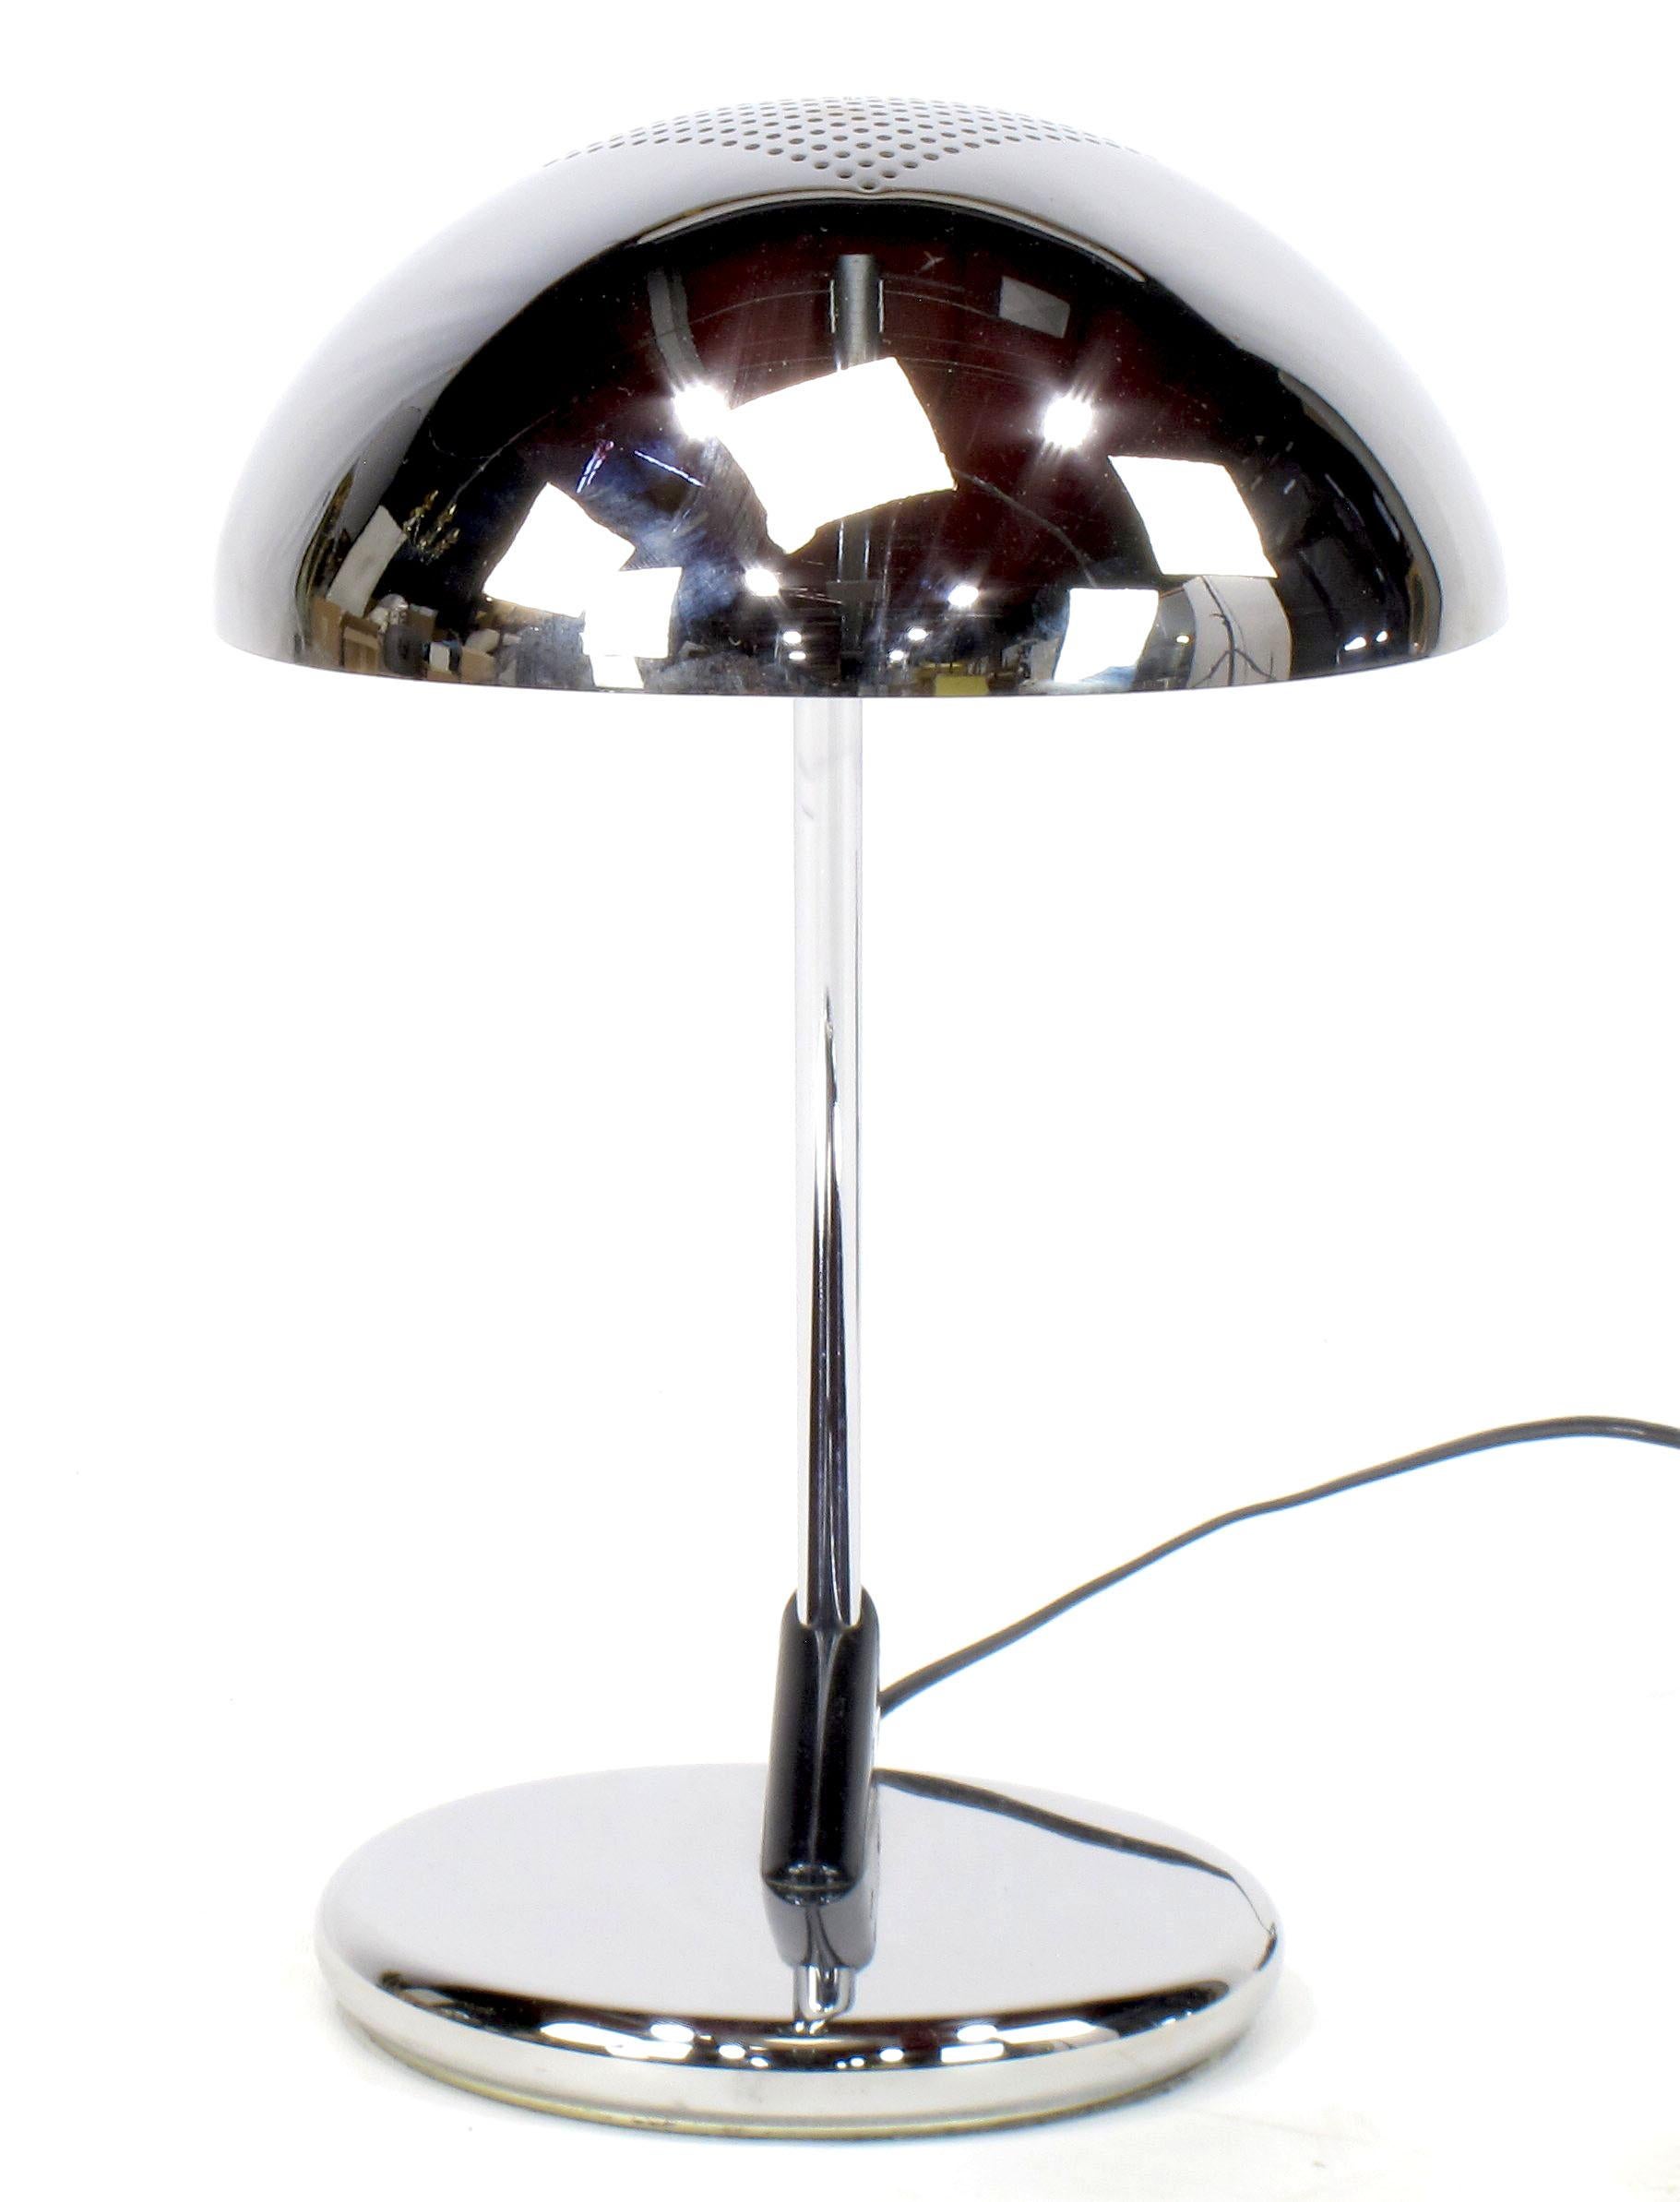 German Pair of Chrome Cantilever Desk Lamps with Domed Shade, circa 1960s For Sale